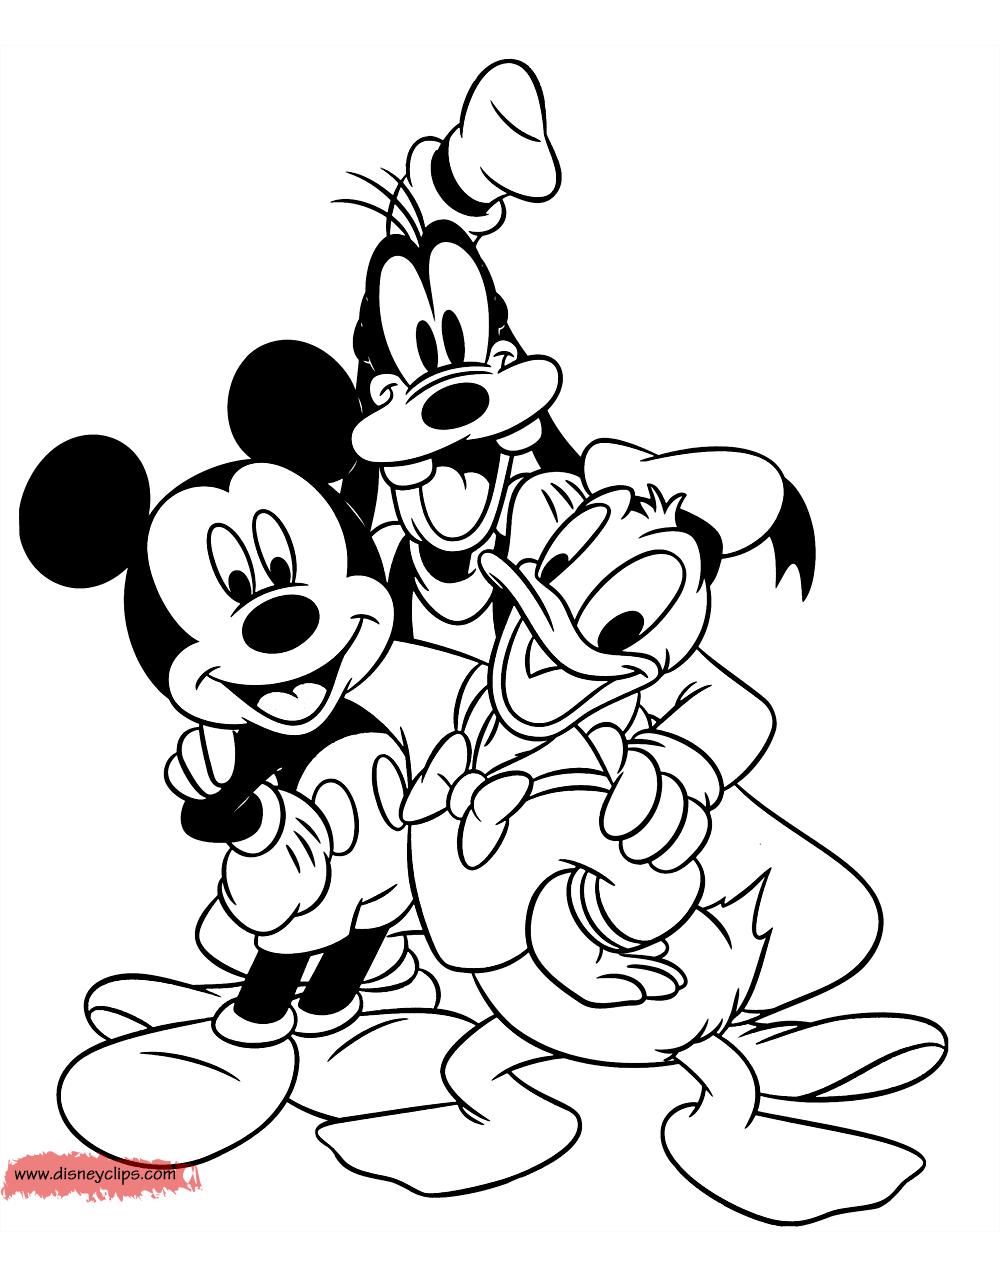 Baby Mickey And Friends Coloring Pages at GetColorings.com | Free ...